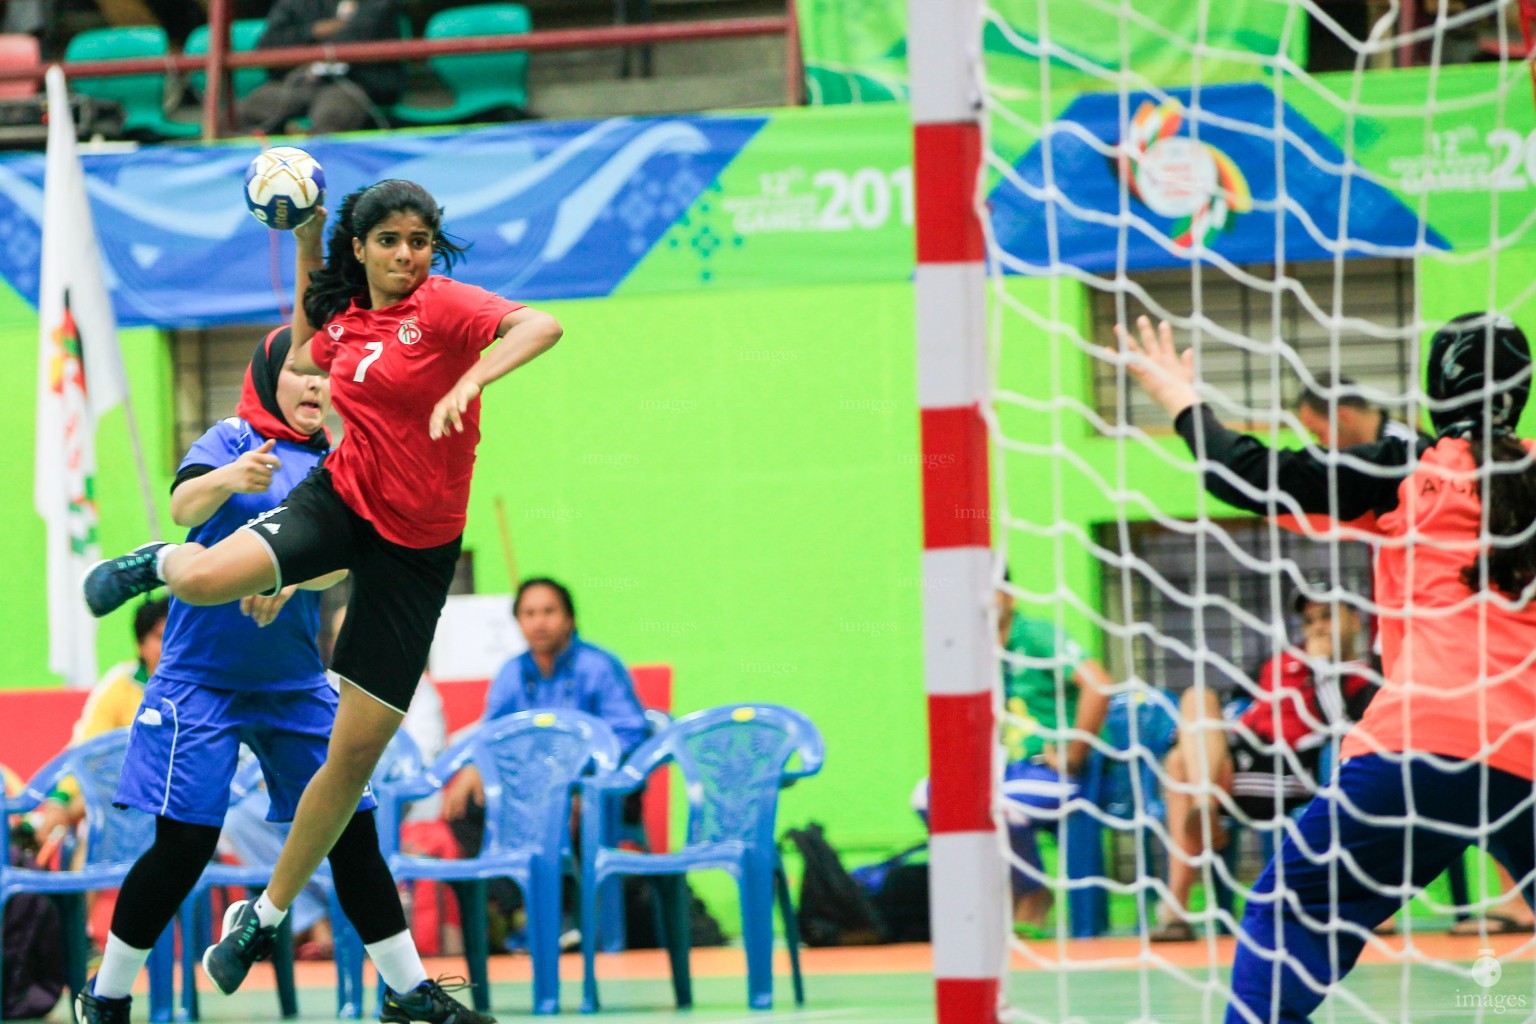 Maldives handball team played against Afghanistan in the group stage matches in the South Asian Games in Guwahati, India, Friday, February. 12, 2016. (Images.mv Photo/ Hussain Sinan).